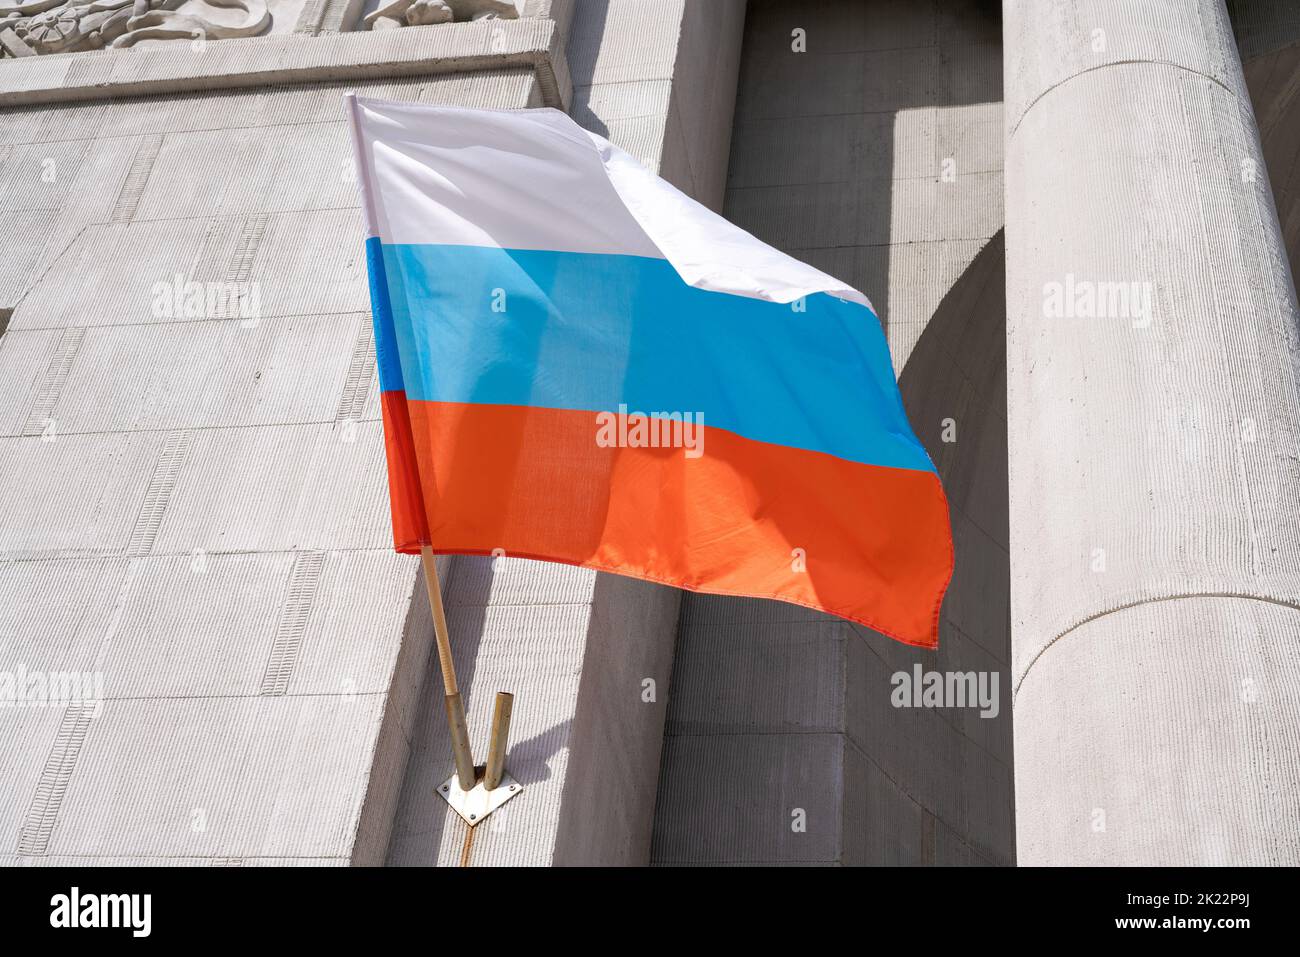 Russian flag. Russian flag displayed on a pole in front house. National flag russian federation is waving up to the house hanging from a pole on the front door of the building. Stock Photo